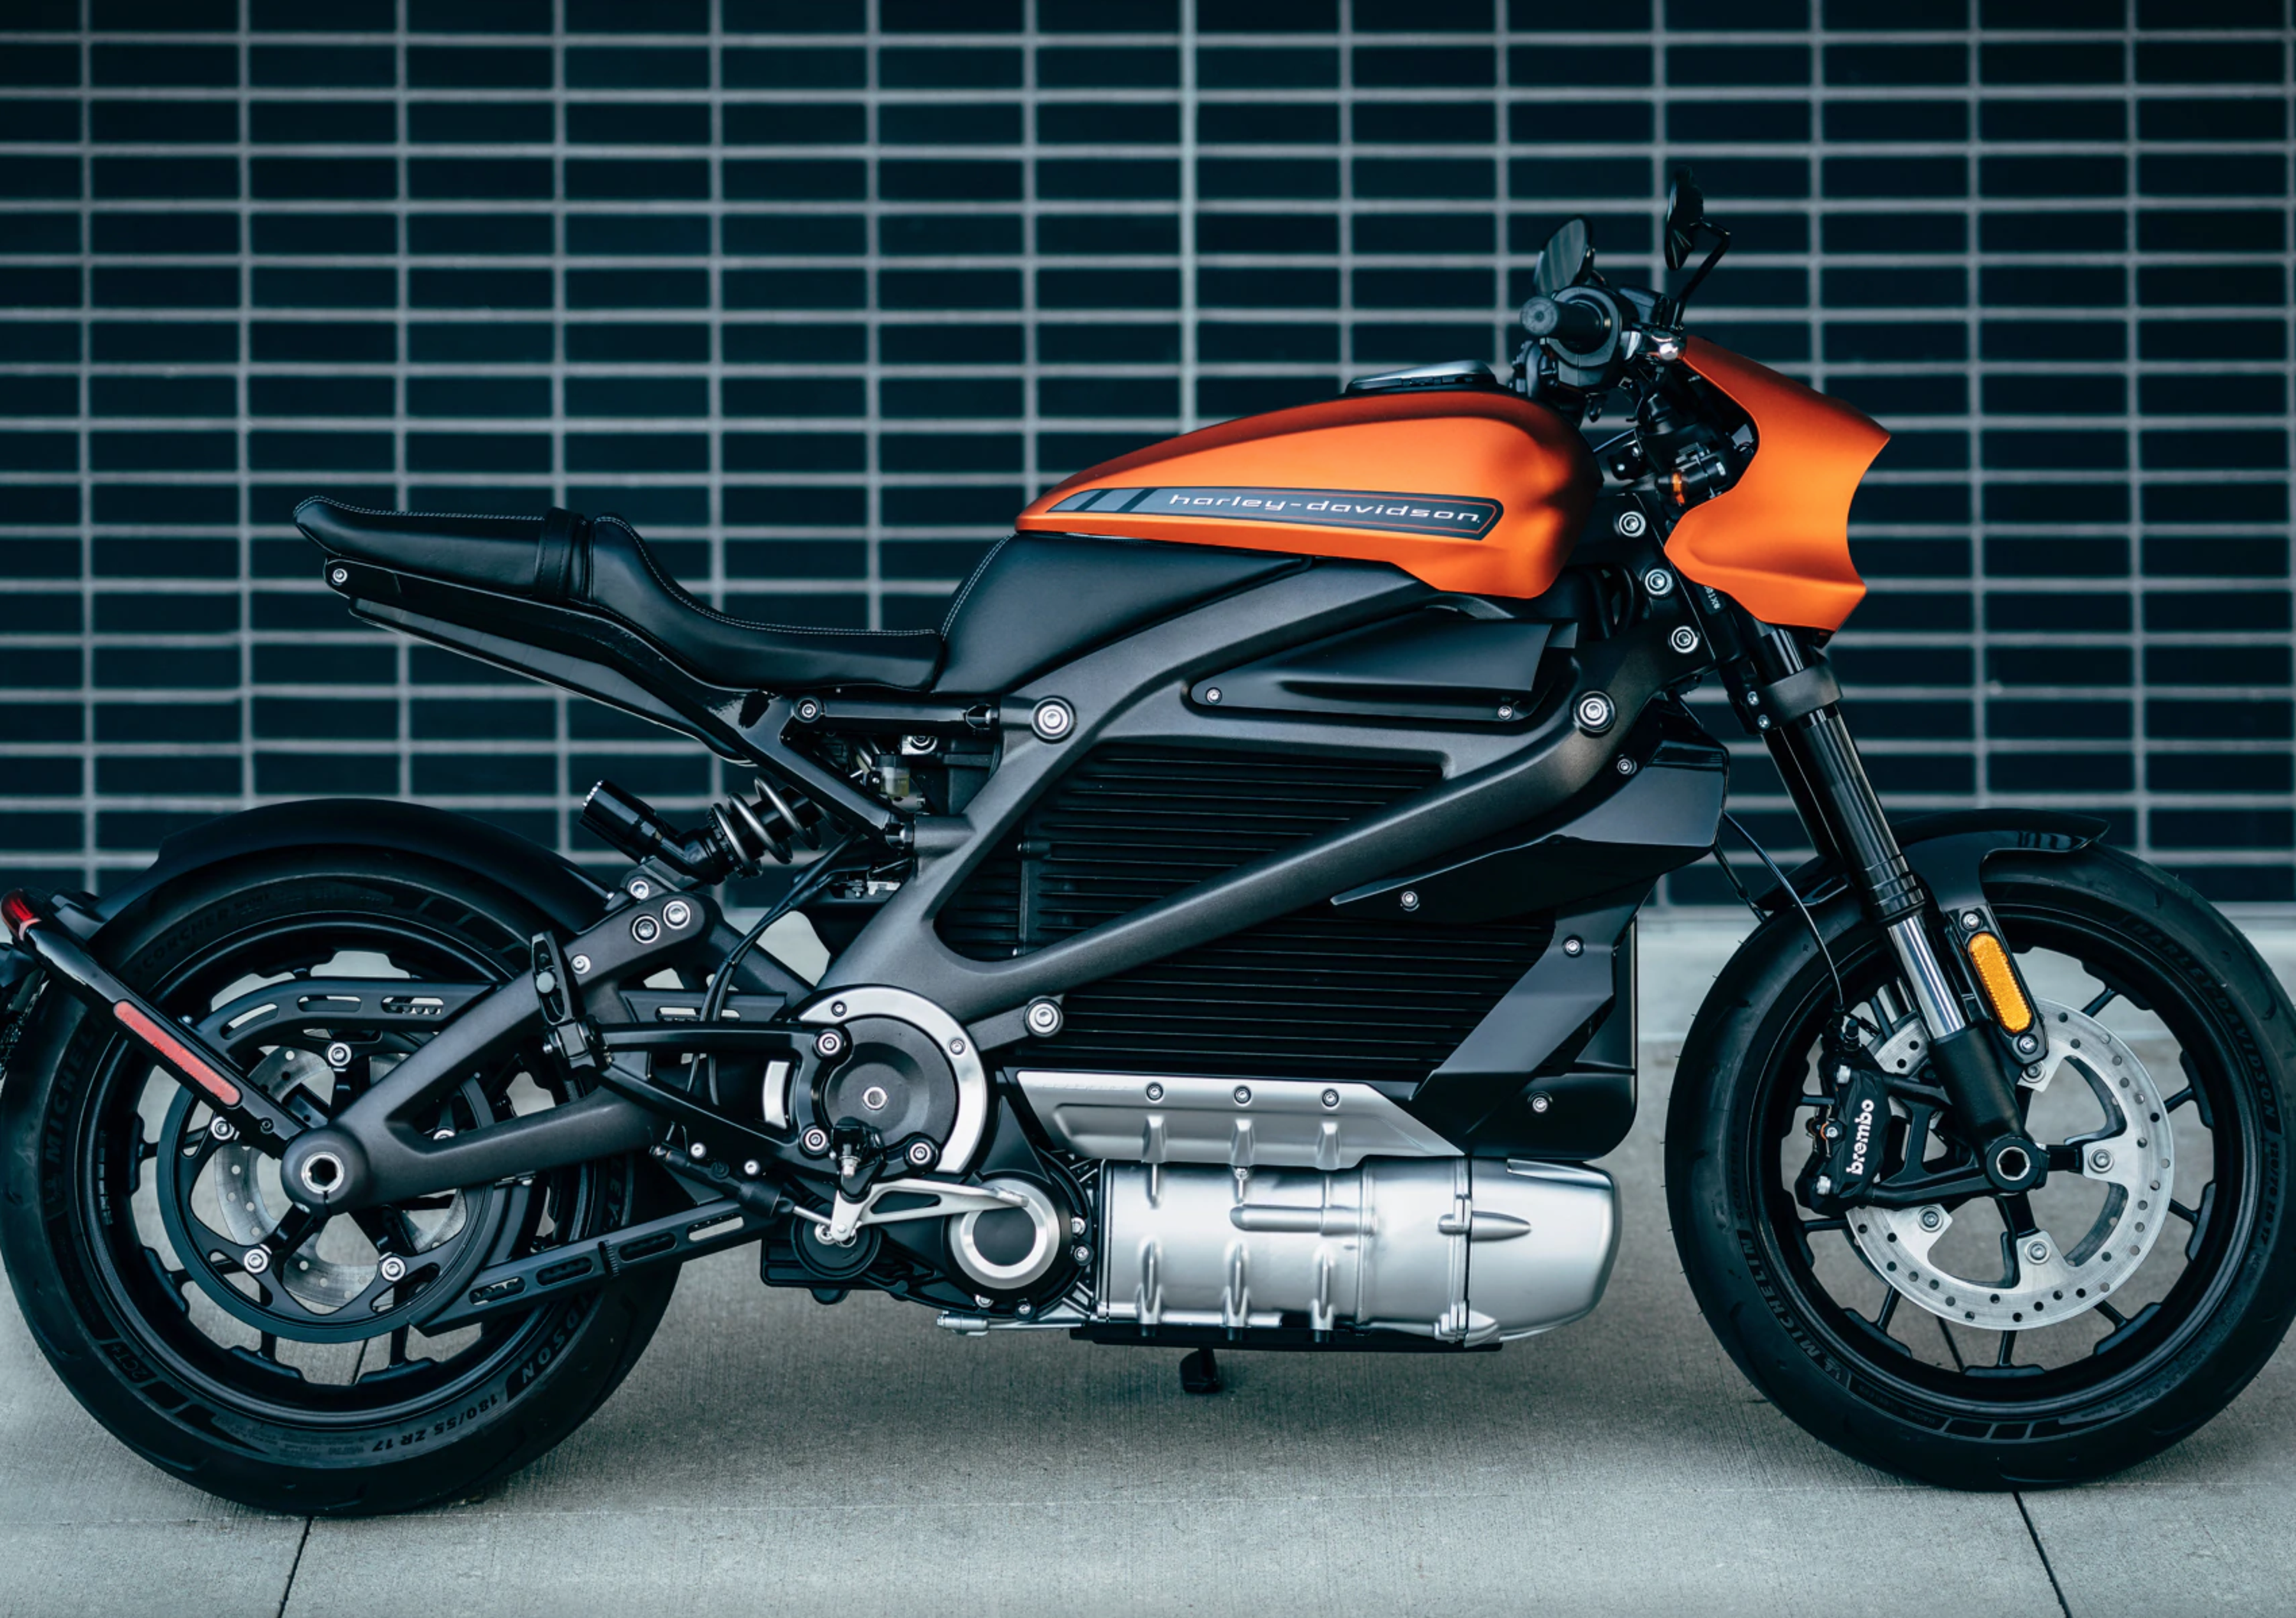 Harley-Davidson. Ryan Morrissey &egrave; il primo Chief Electric Vehicle Officer